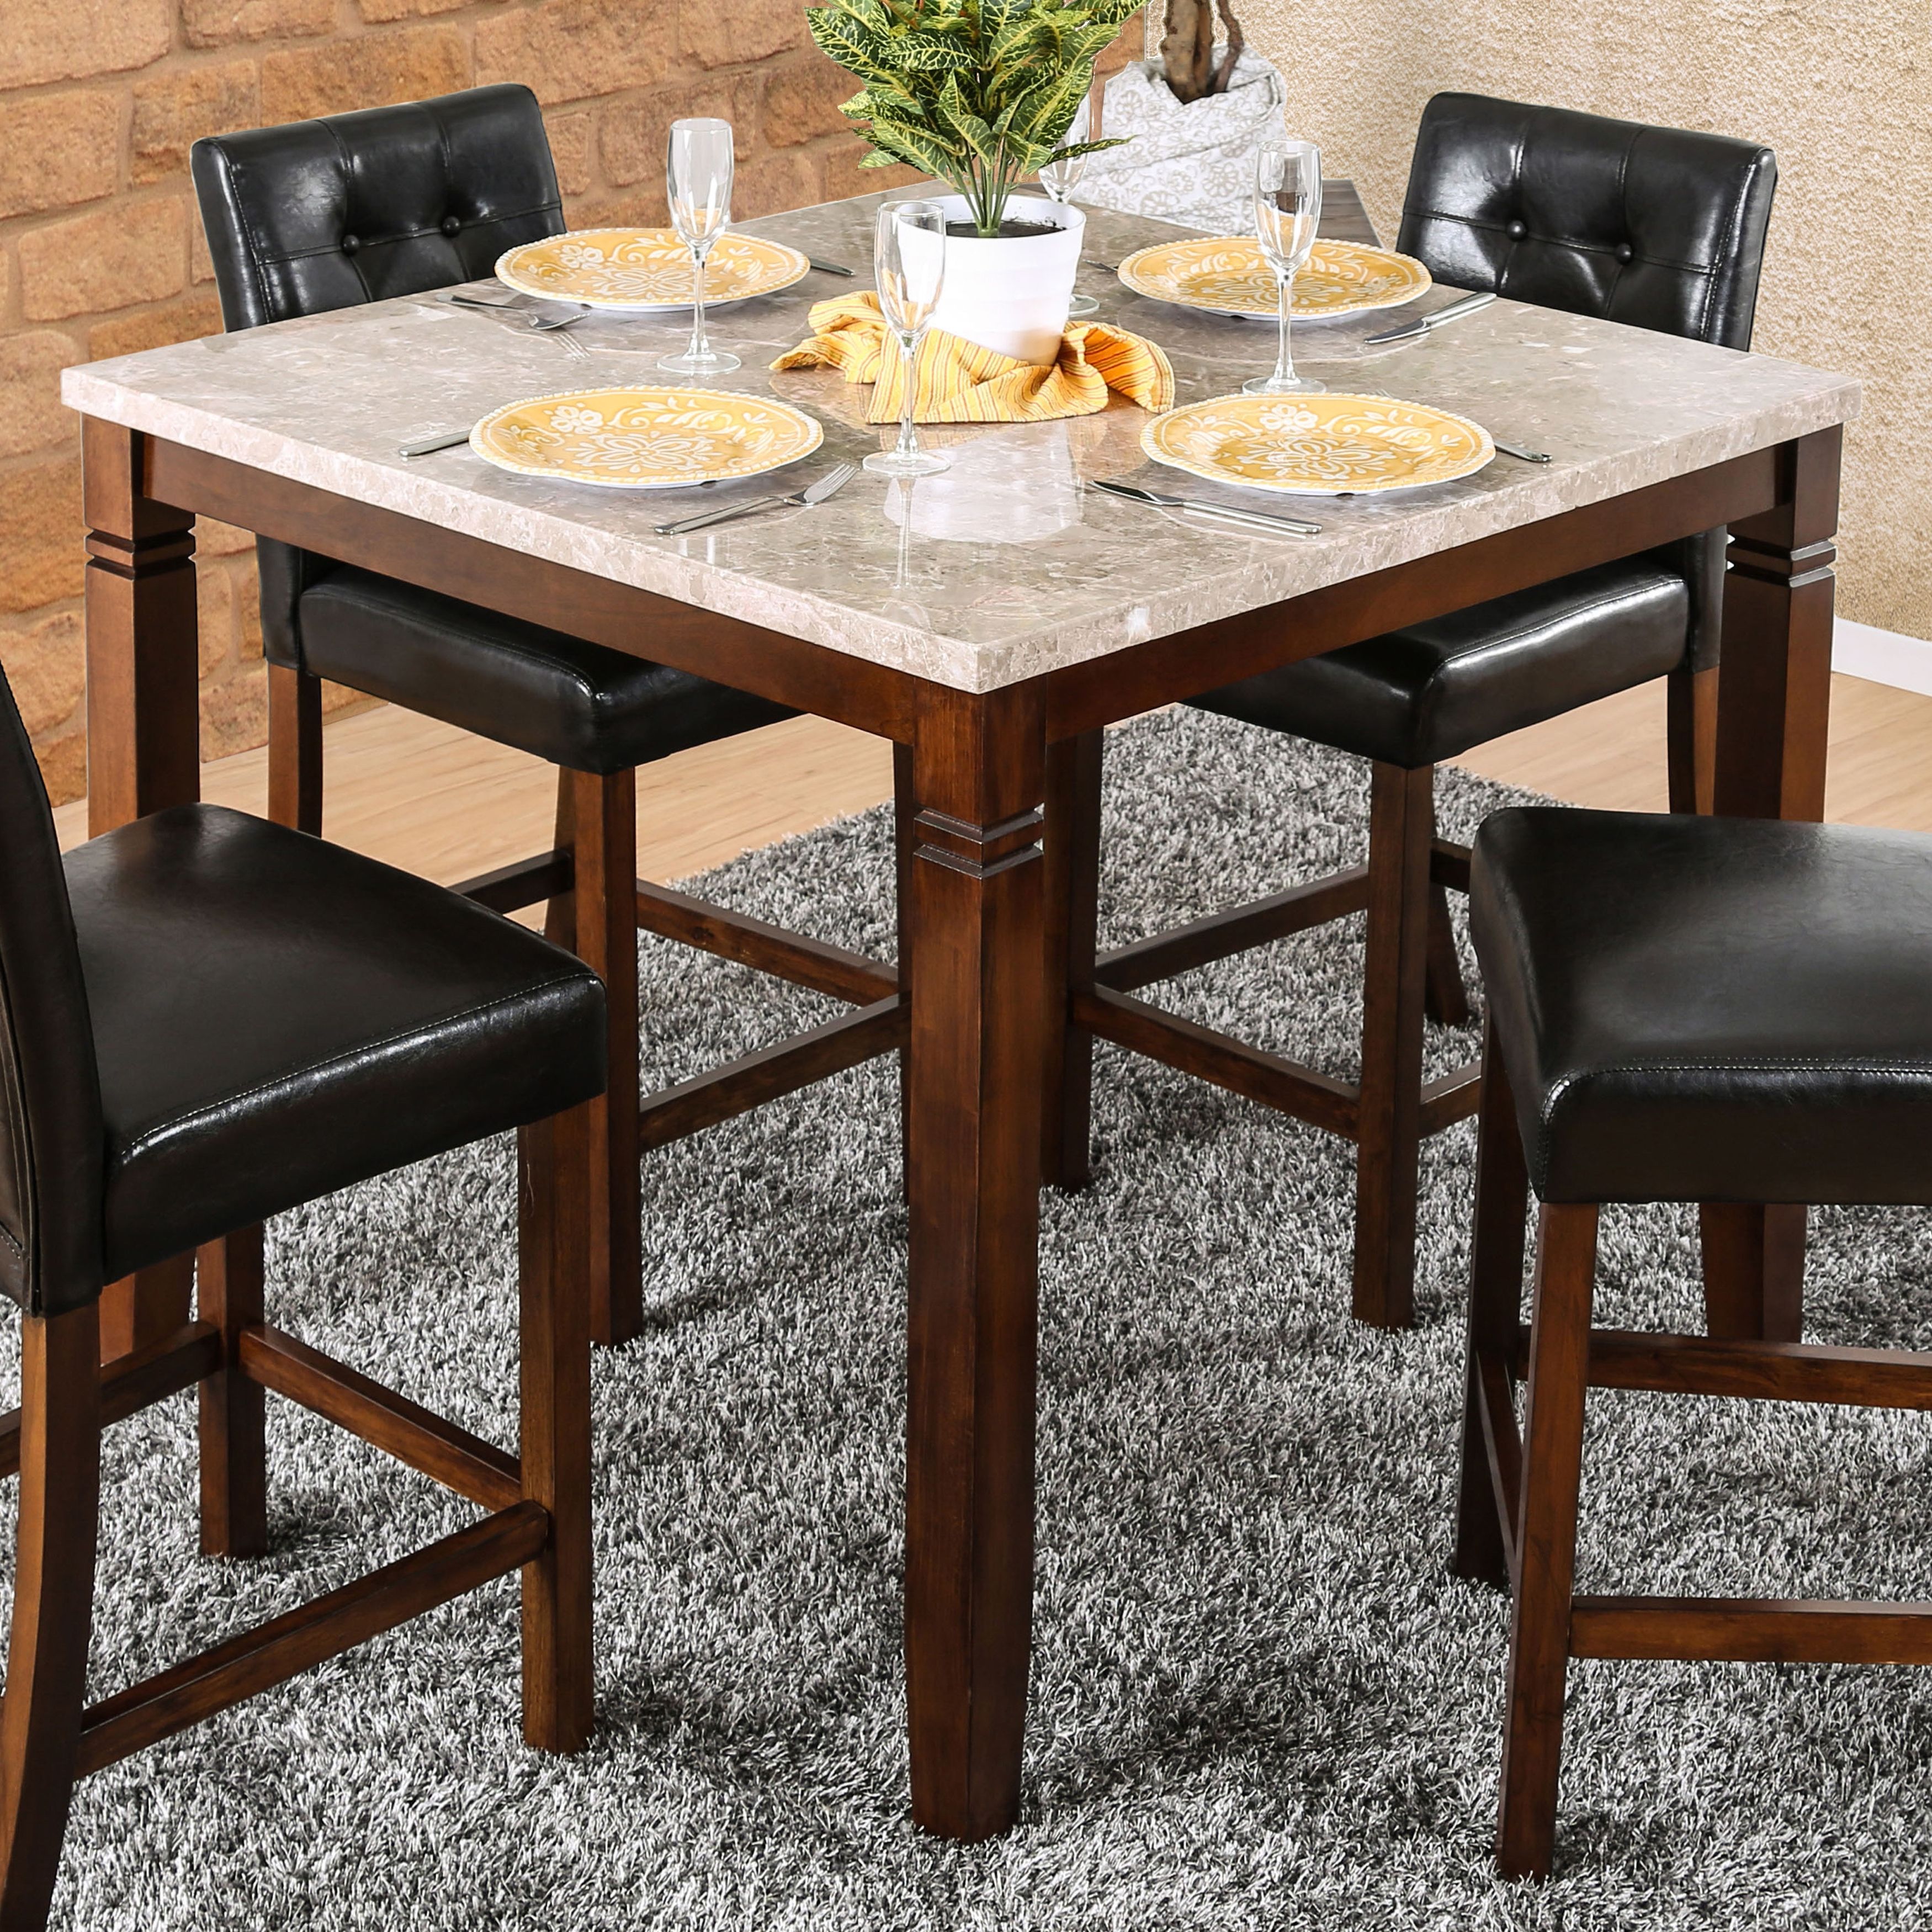 43 Types Of Tables For Your Home (2018 Buying Guide) Pertaining To Widely Used 33 Inch Industrial Round Tables (View 8 of 20)